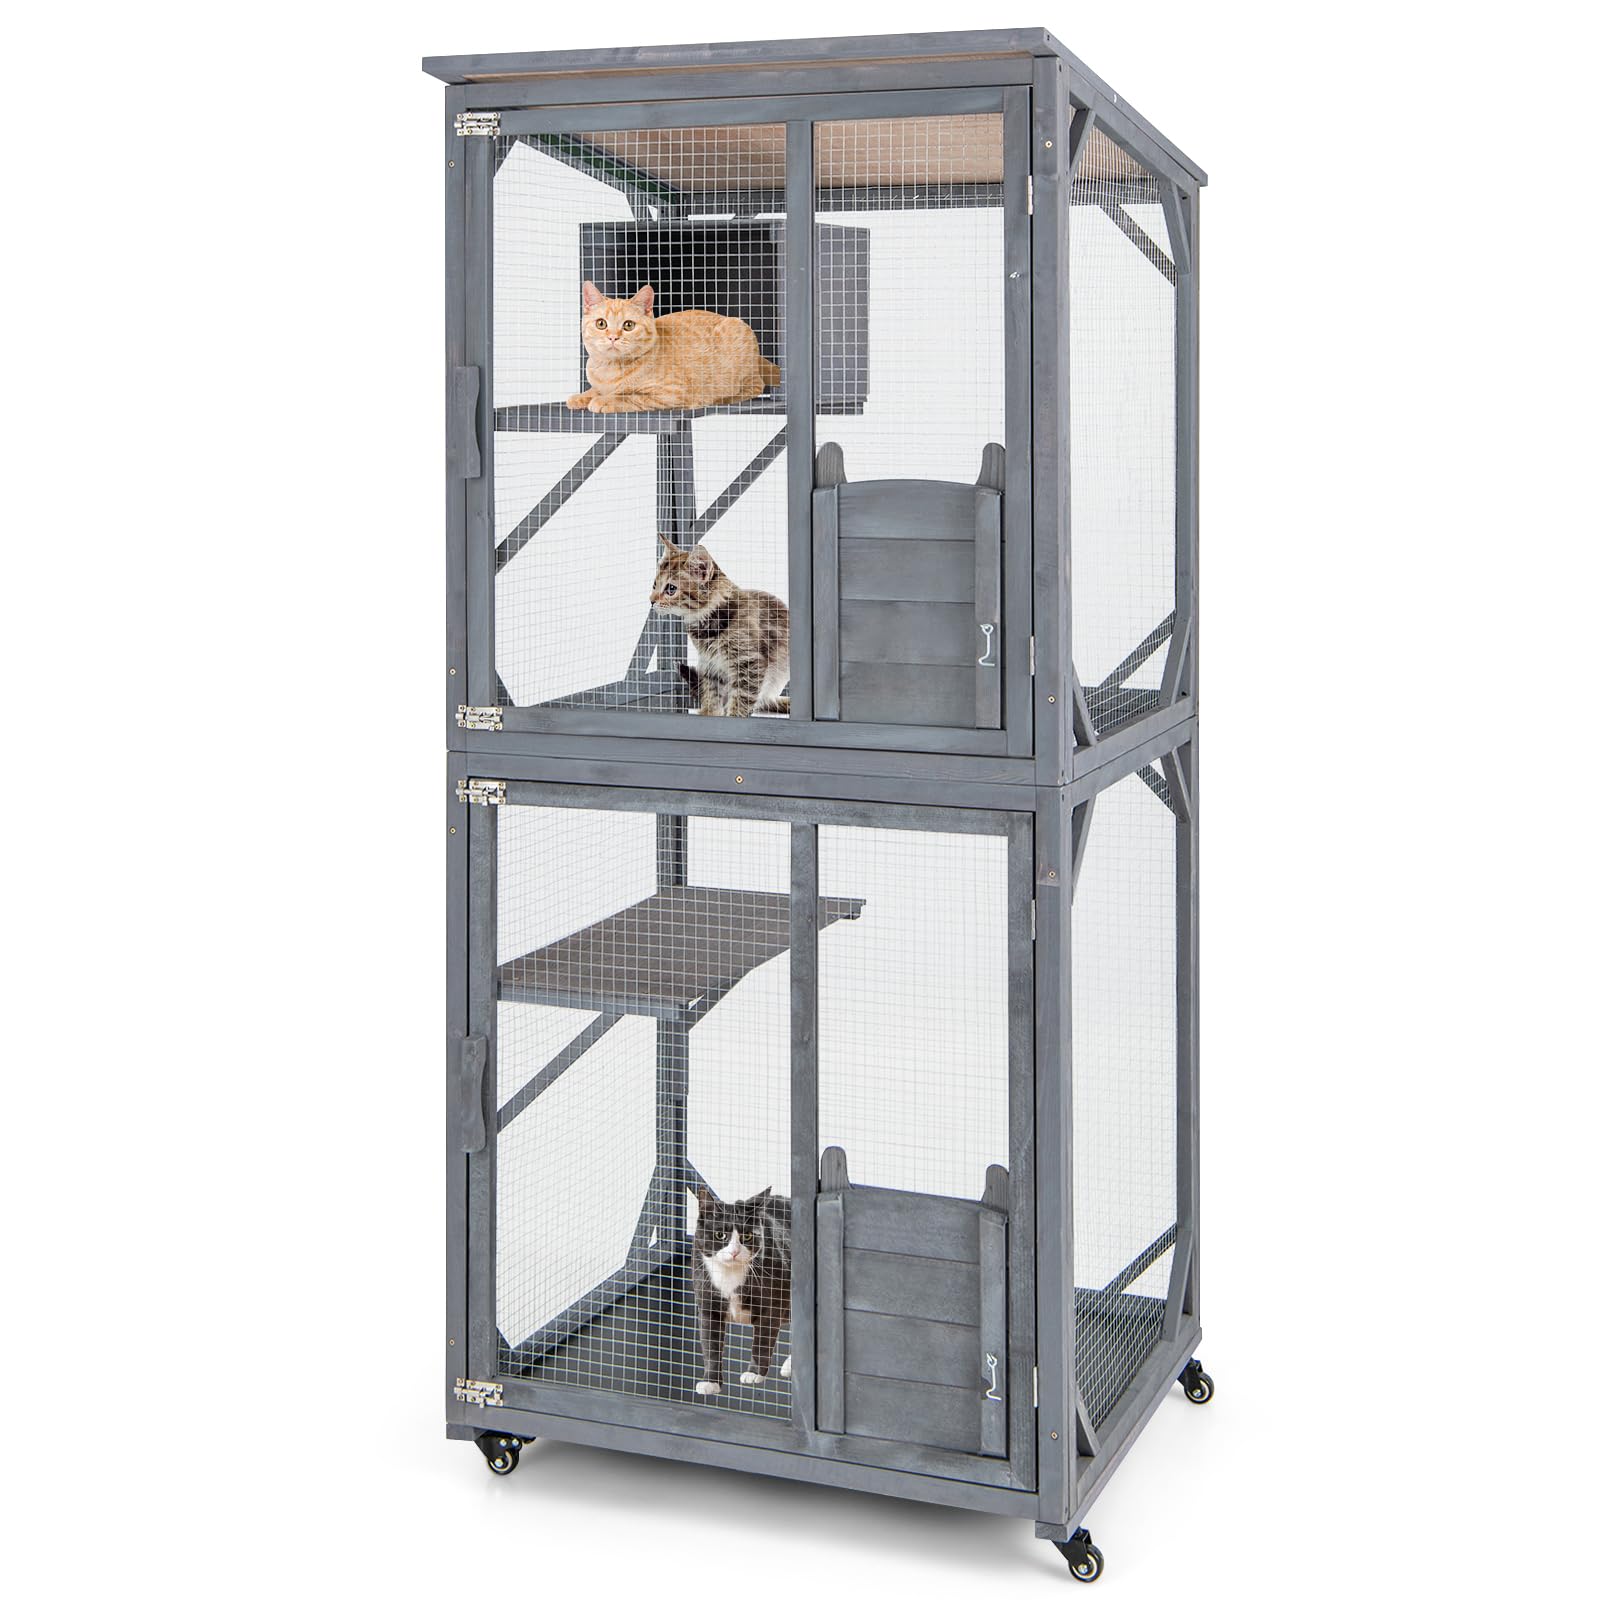 Tangkula Catio Outdoor Cat Enclosure, Wooden Cat House on Wheels, 31.5" x 27.5" x 72"